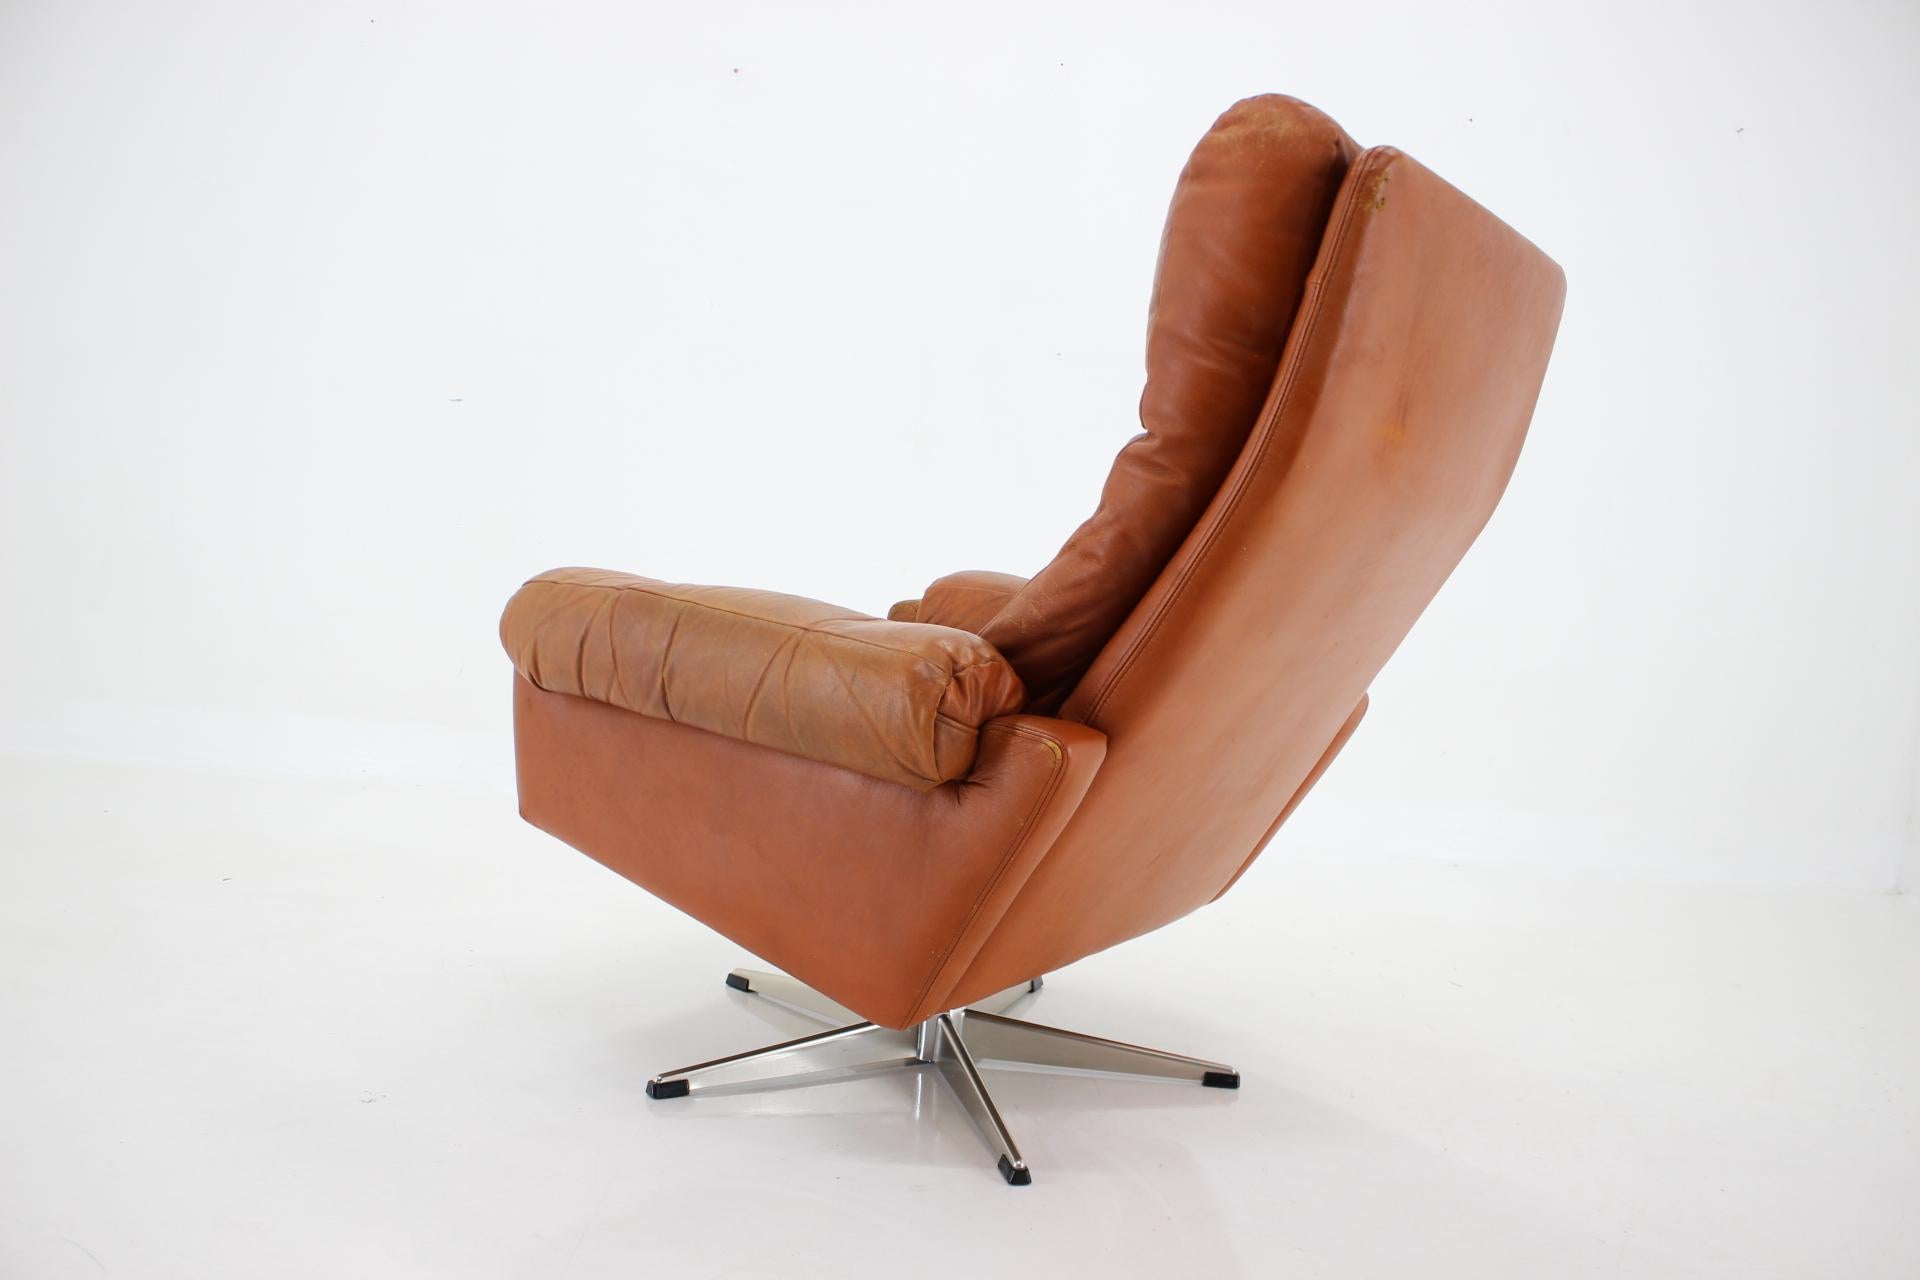 1970s Leather Swivel Armchair by Nili Stoppmobler, Denmark For Sale 1